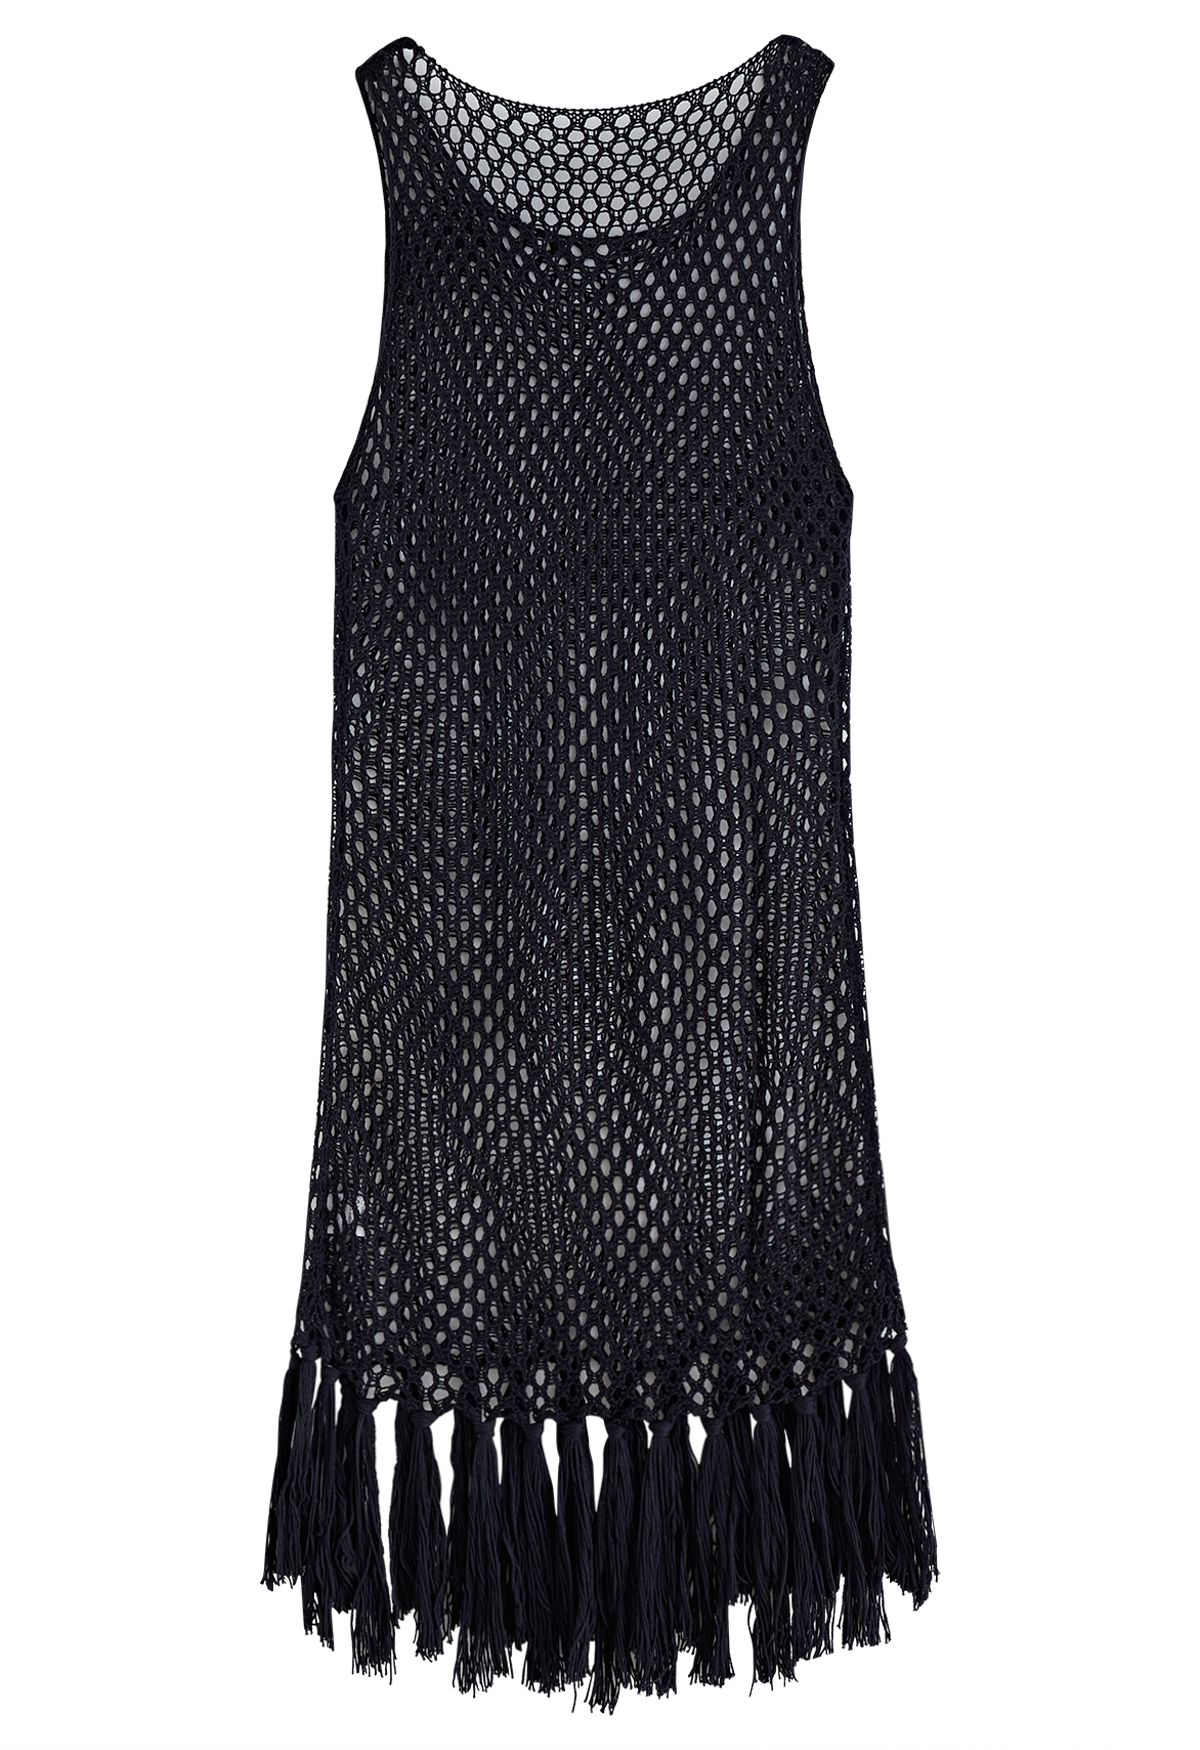 Tassel Hem Hollow Out Sleeveless Knit Cover Up in Black